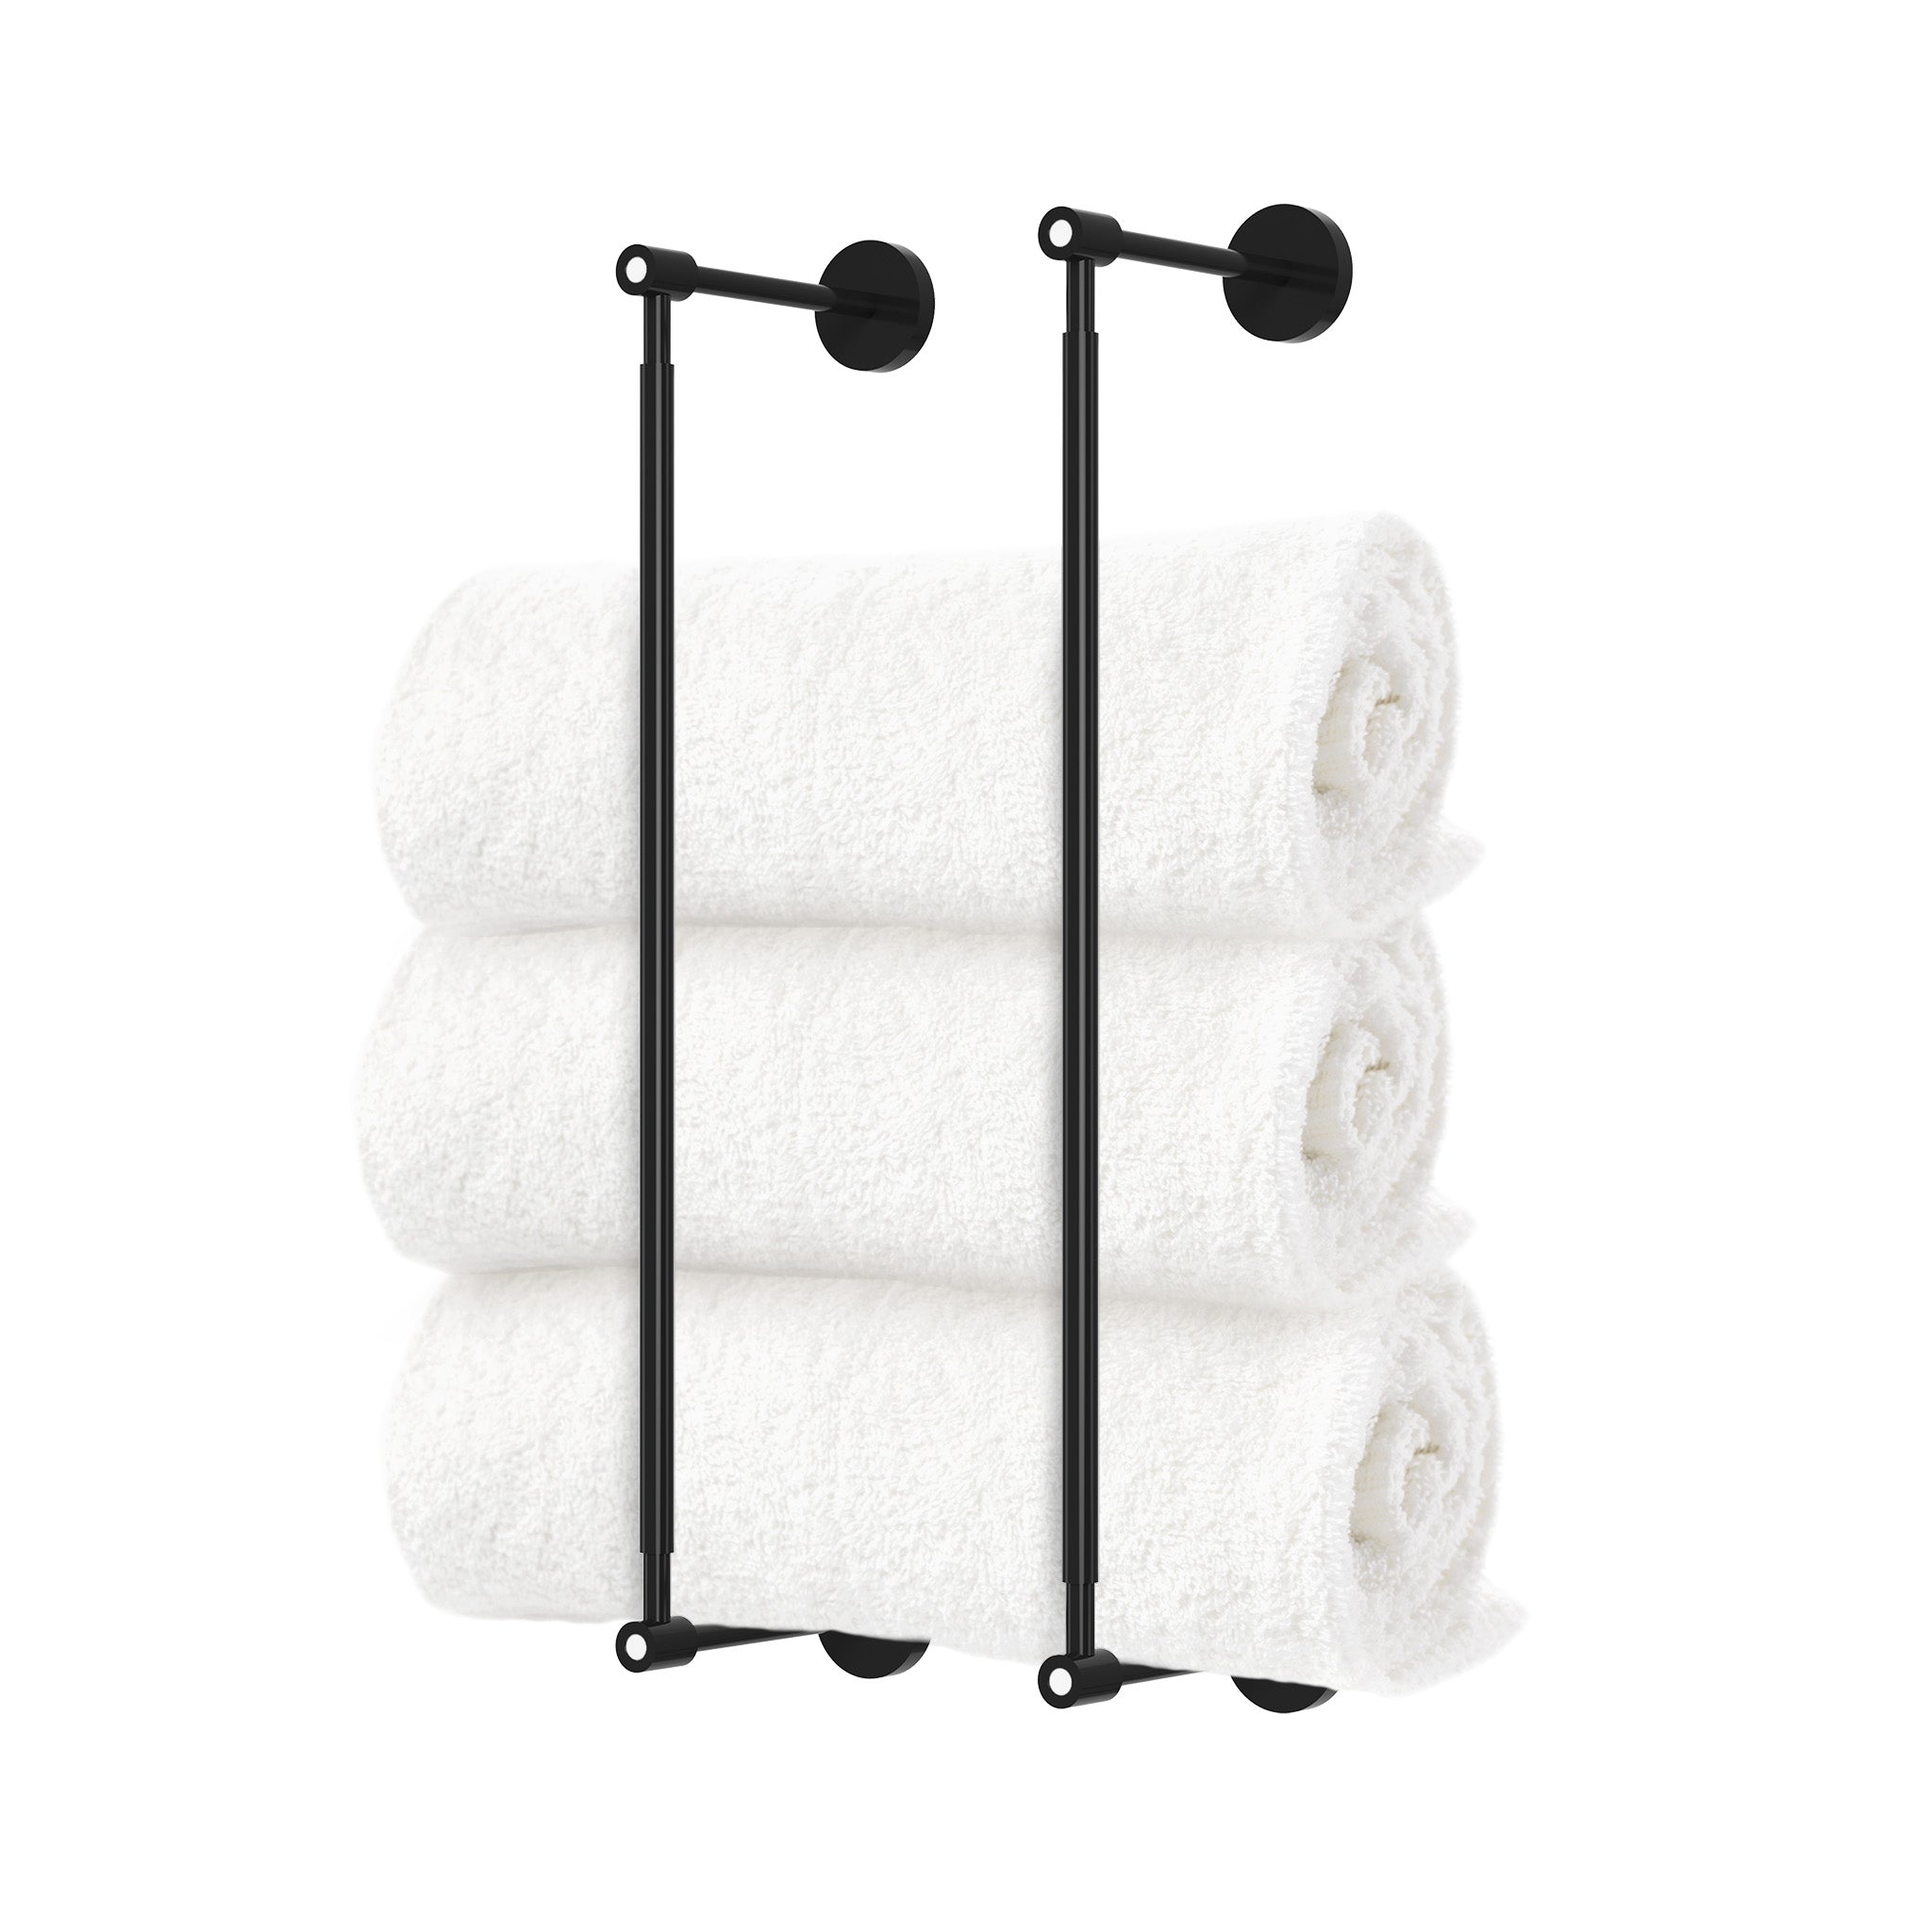 Black and white head towel rack 18 inch dutton brown hardware